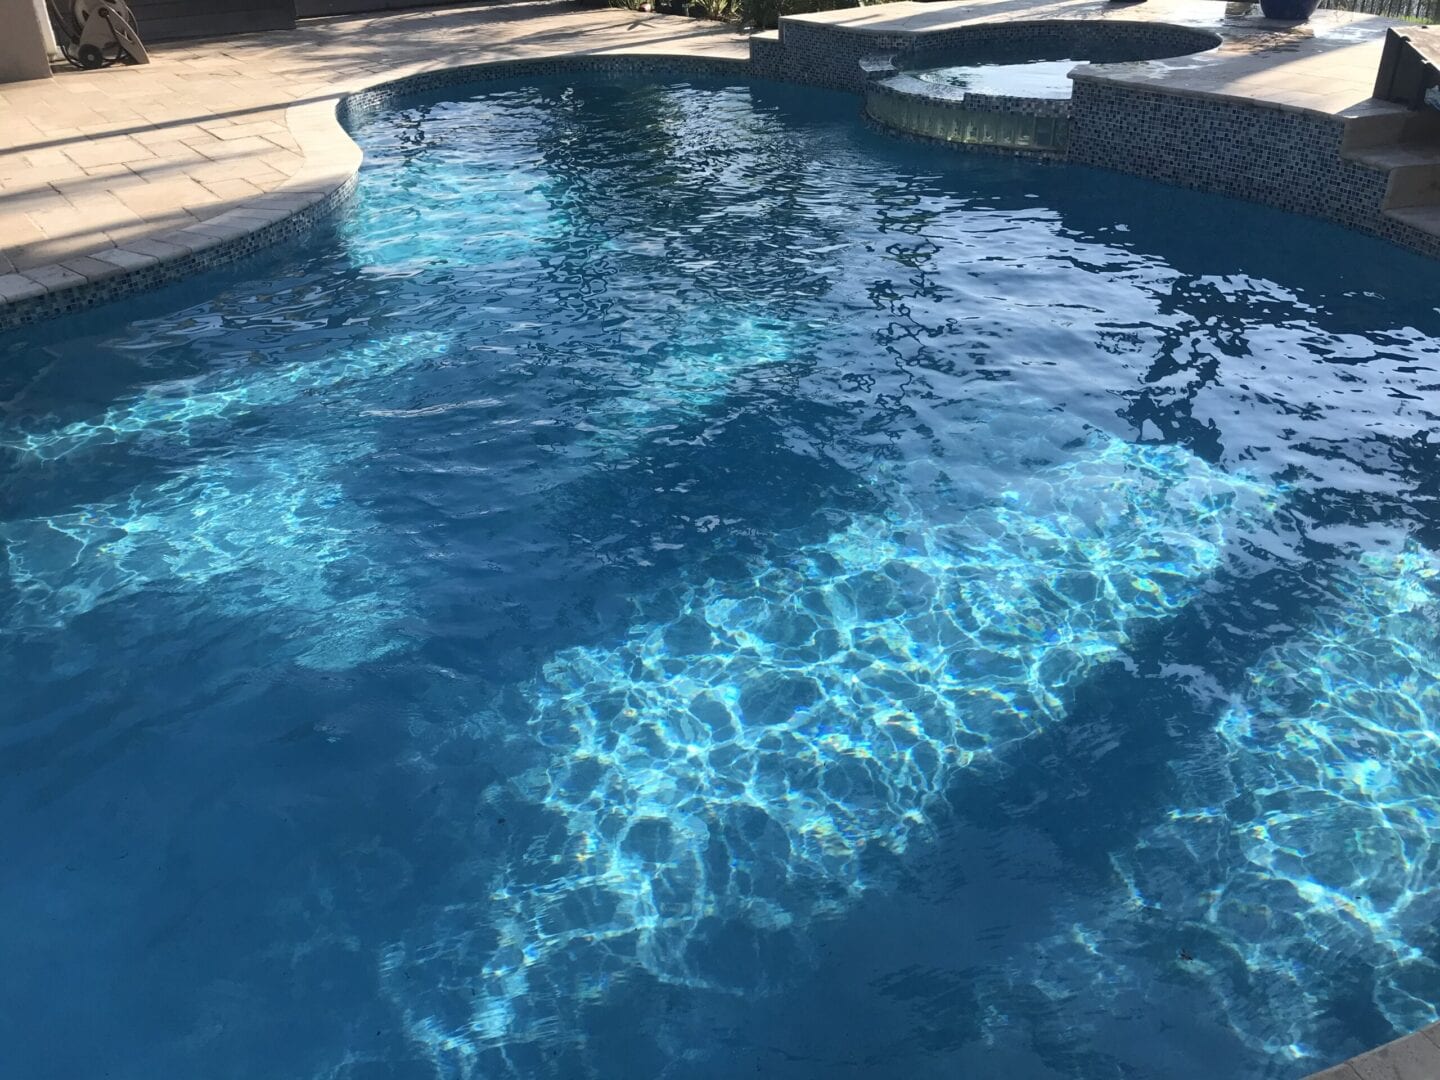 Water in a curvy pool